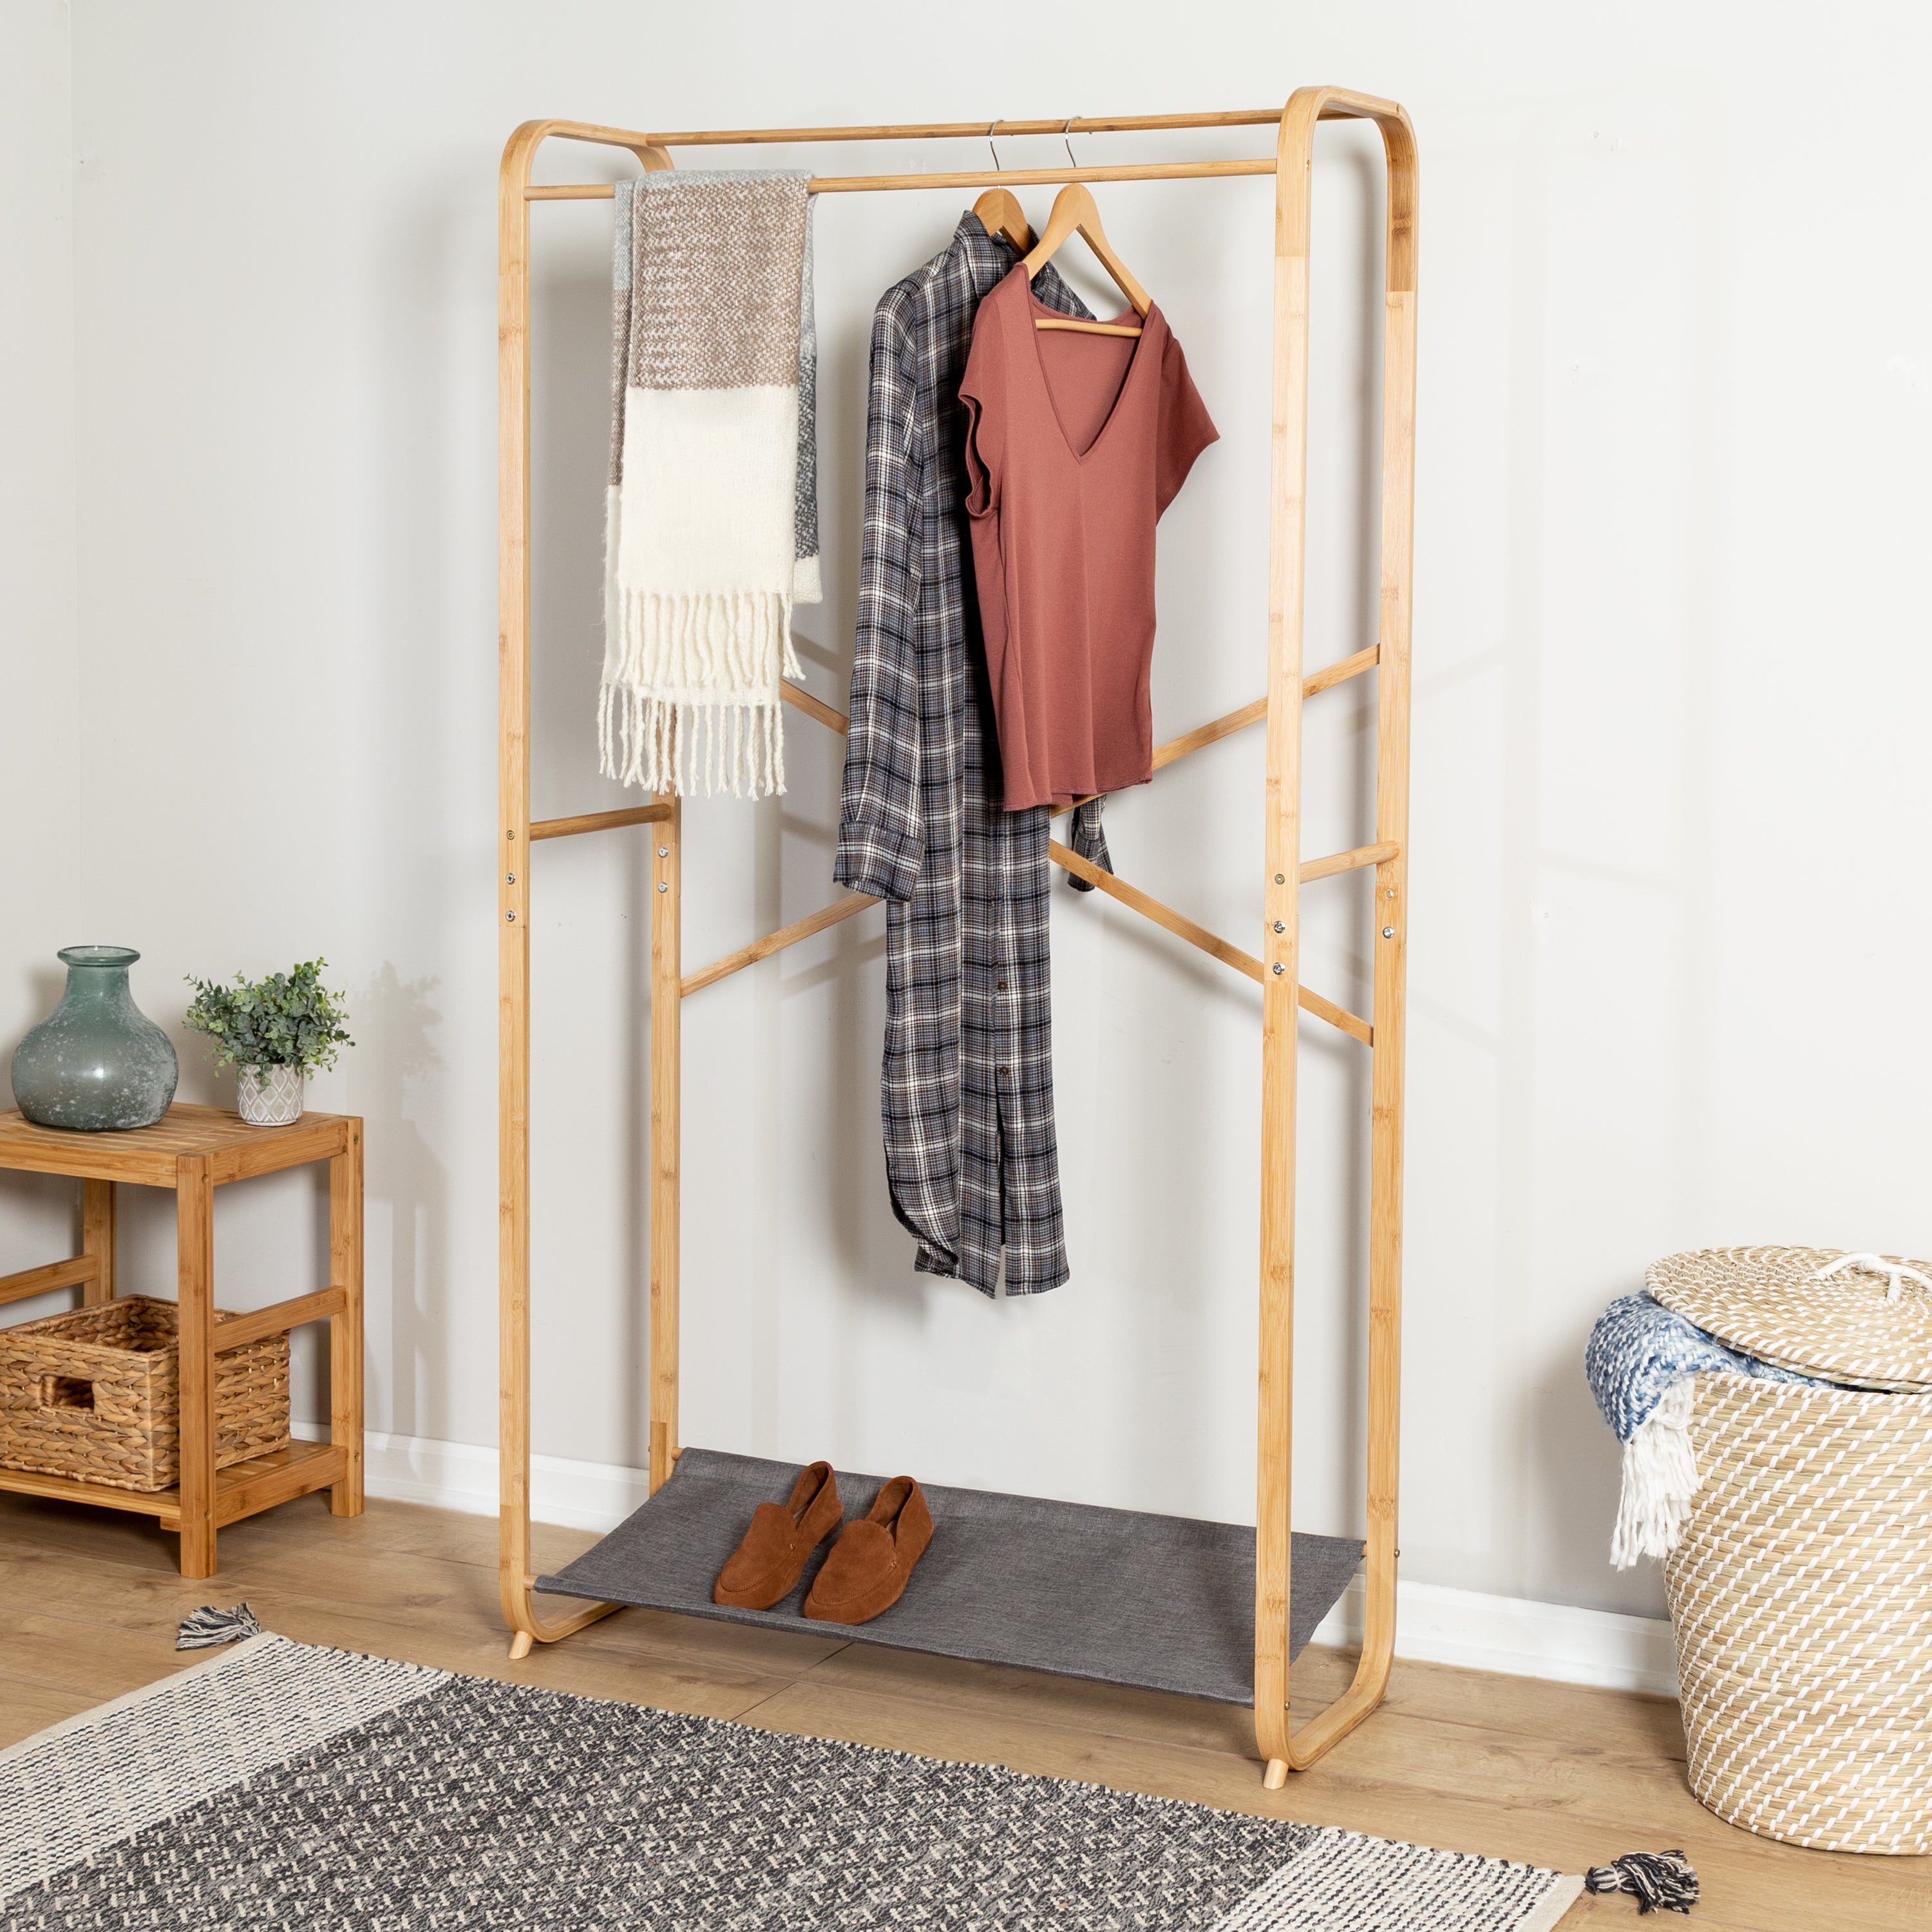 Buy Bamboo Hangers and Cheap Metal Hangers to Organize Your Closet